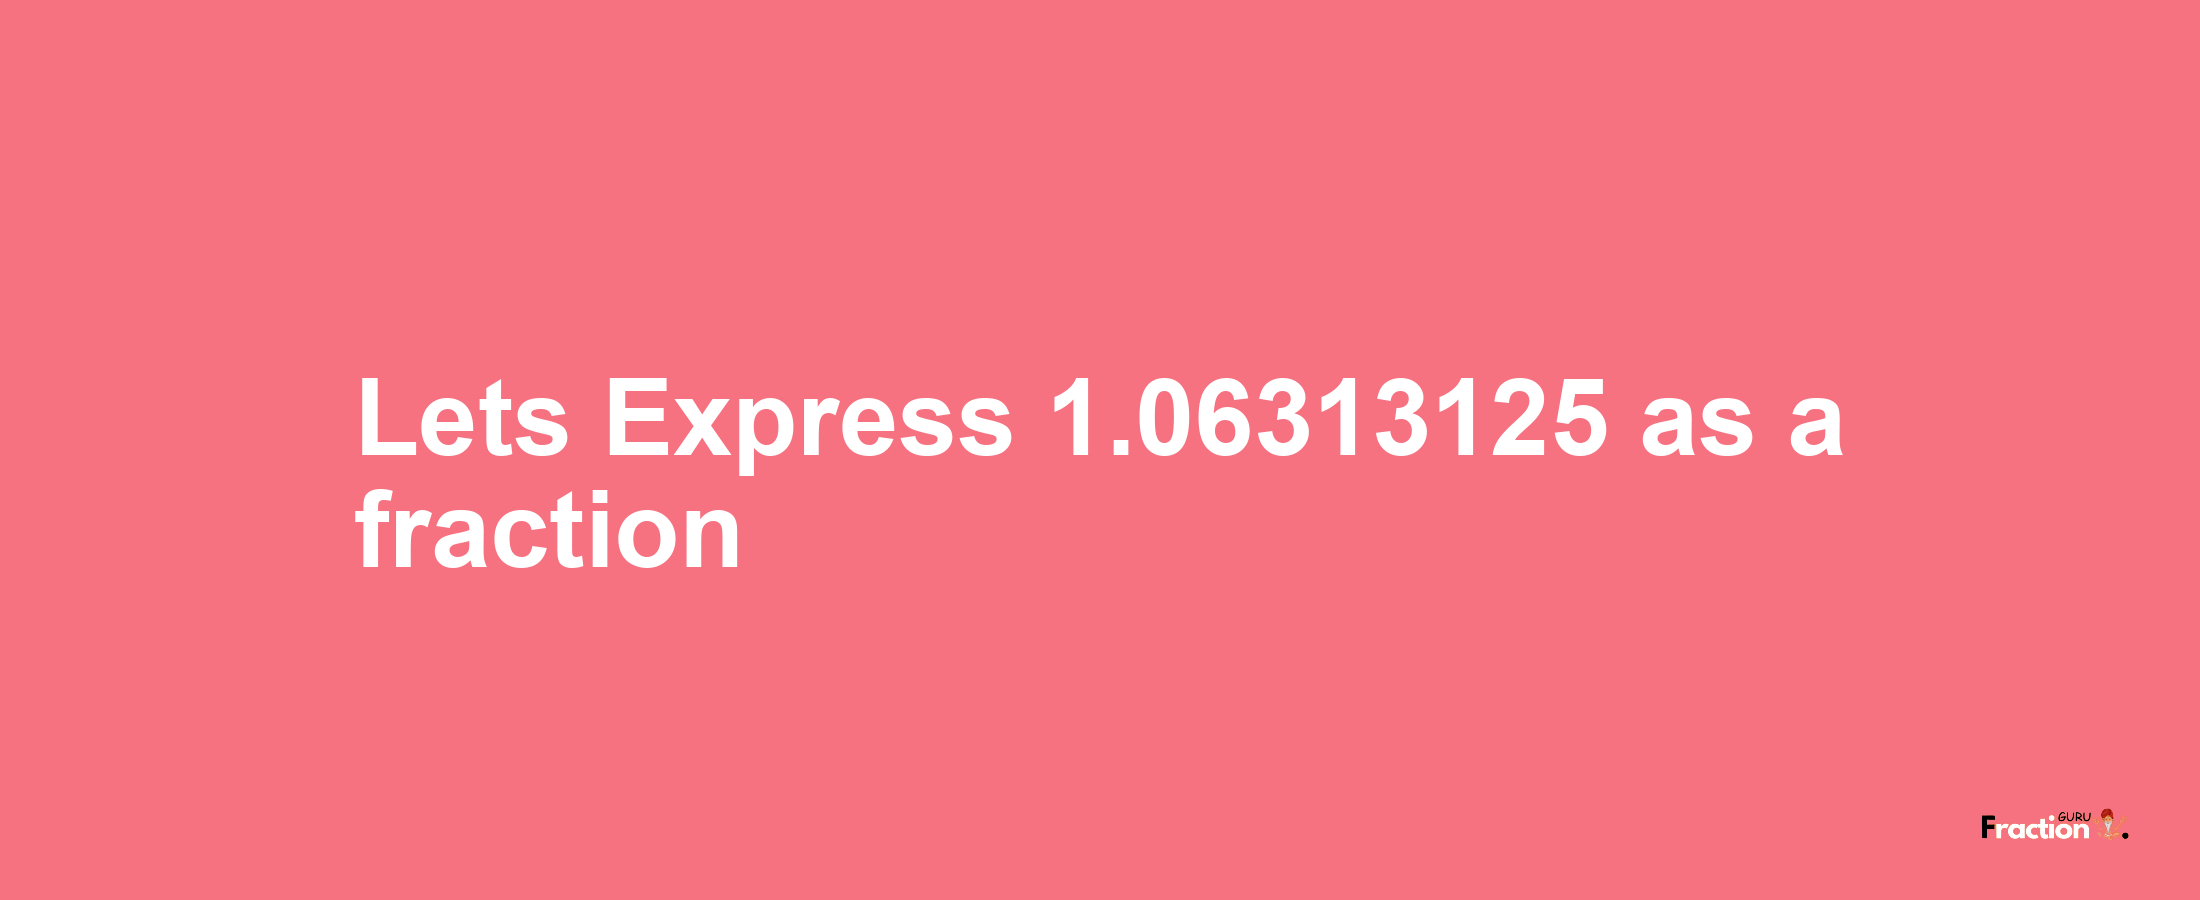 Lets Express 1.06313125 as afraction